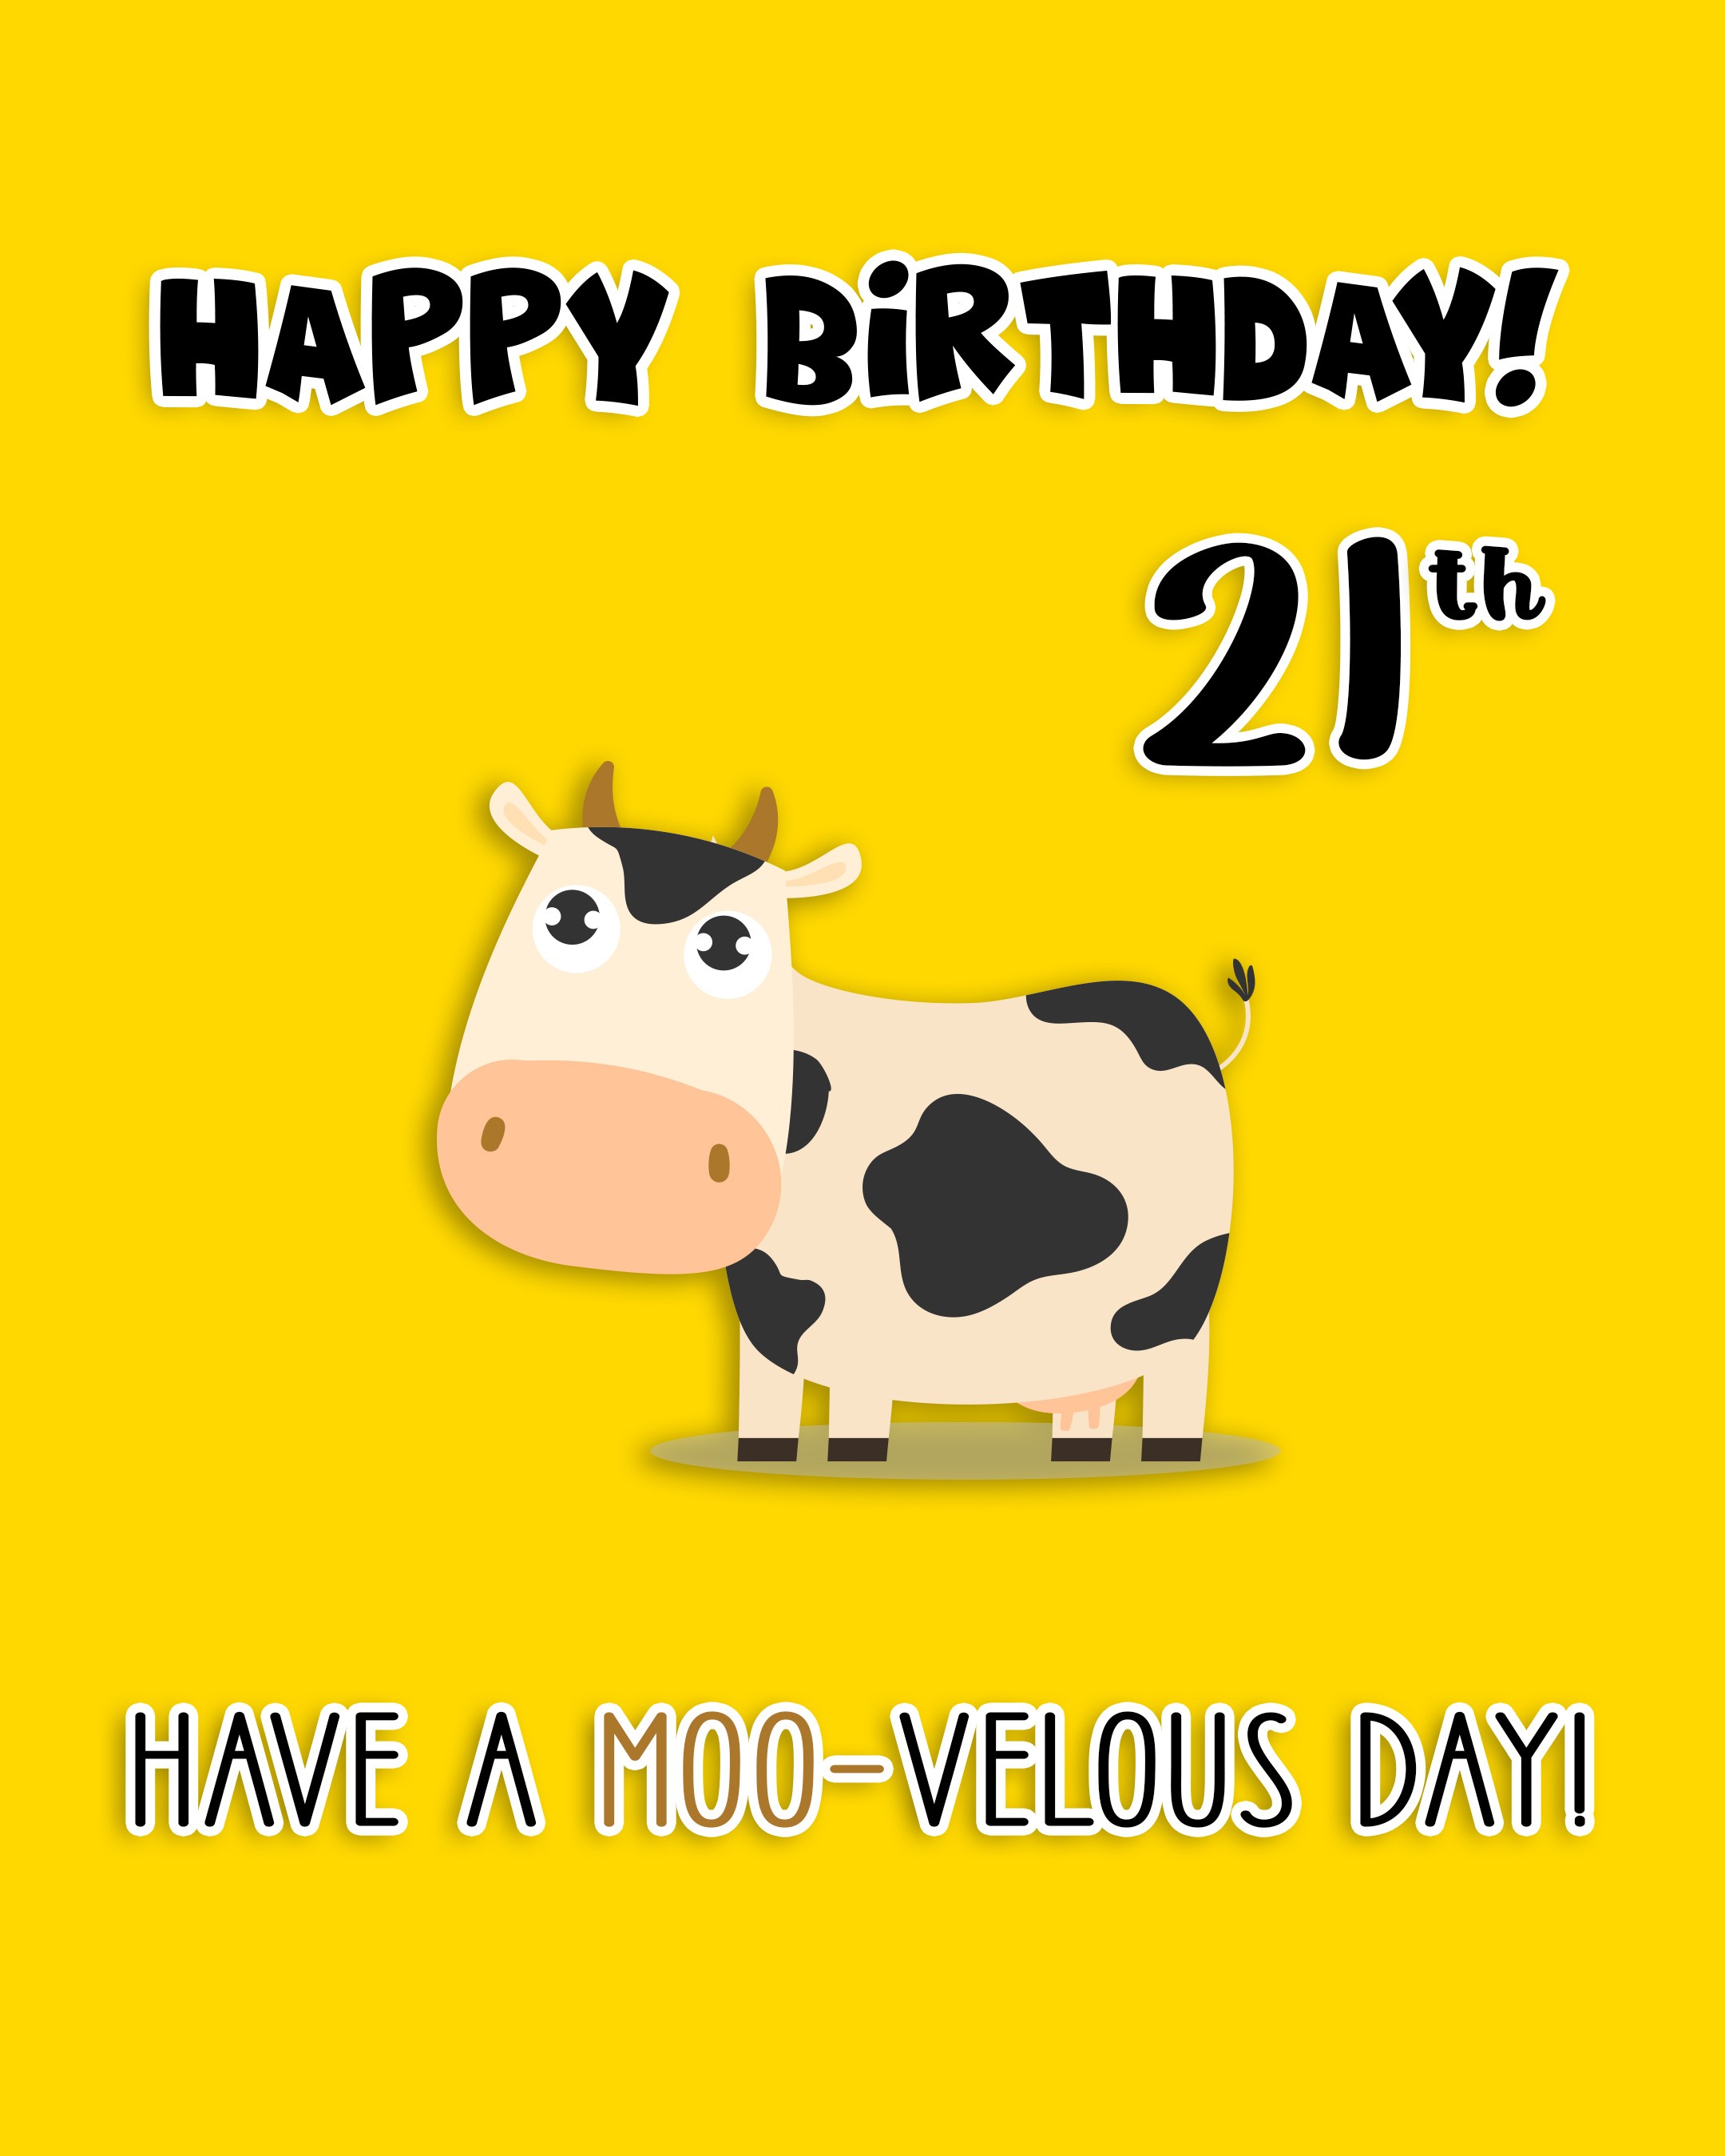 Free 21th Years Happy Birthday Image With Funny Cow - birthdayimg.com